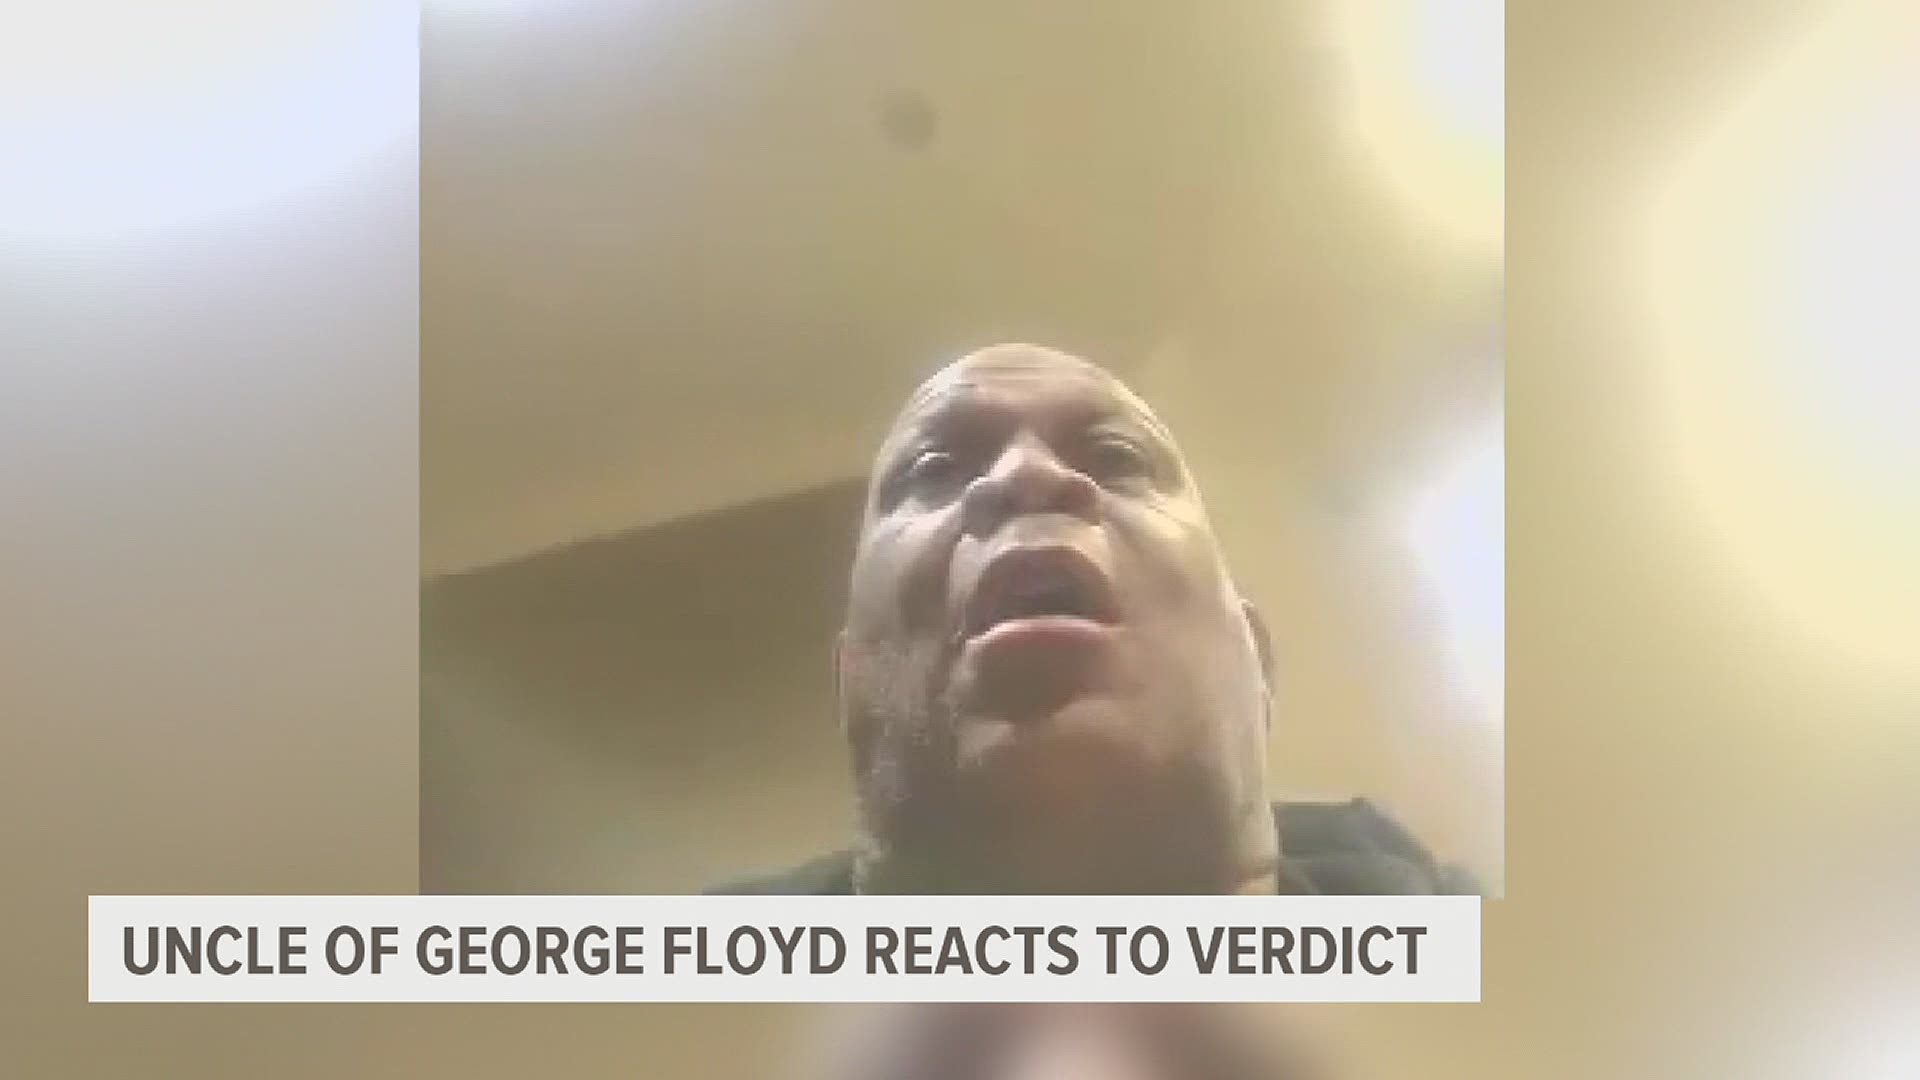 FOX43's Jamie Bittner spoke one-on-one with George Floyd's uncle following the court decision.